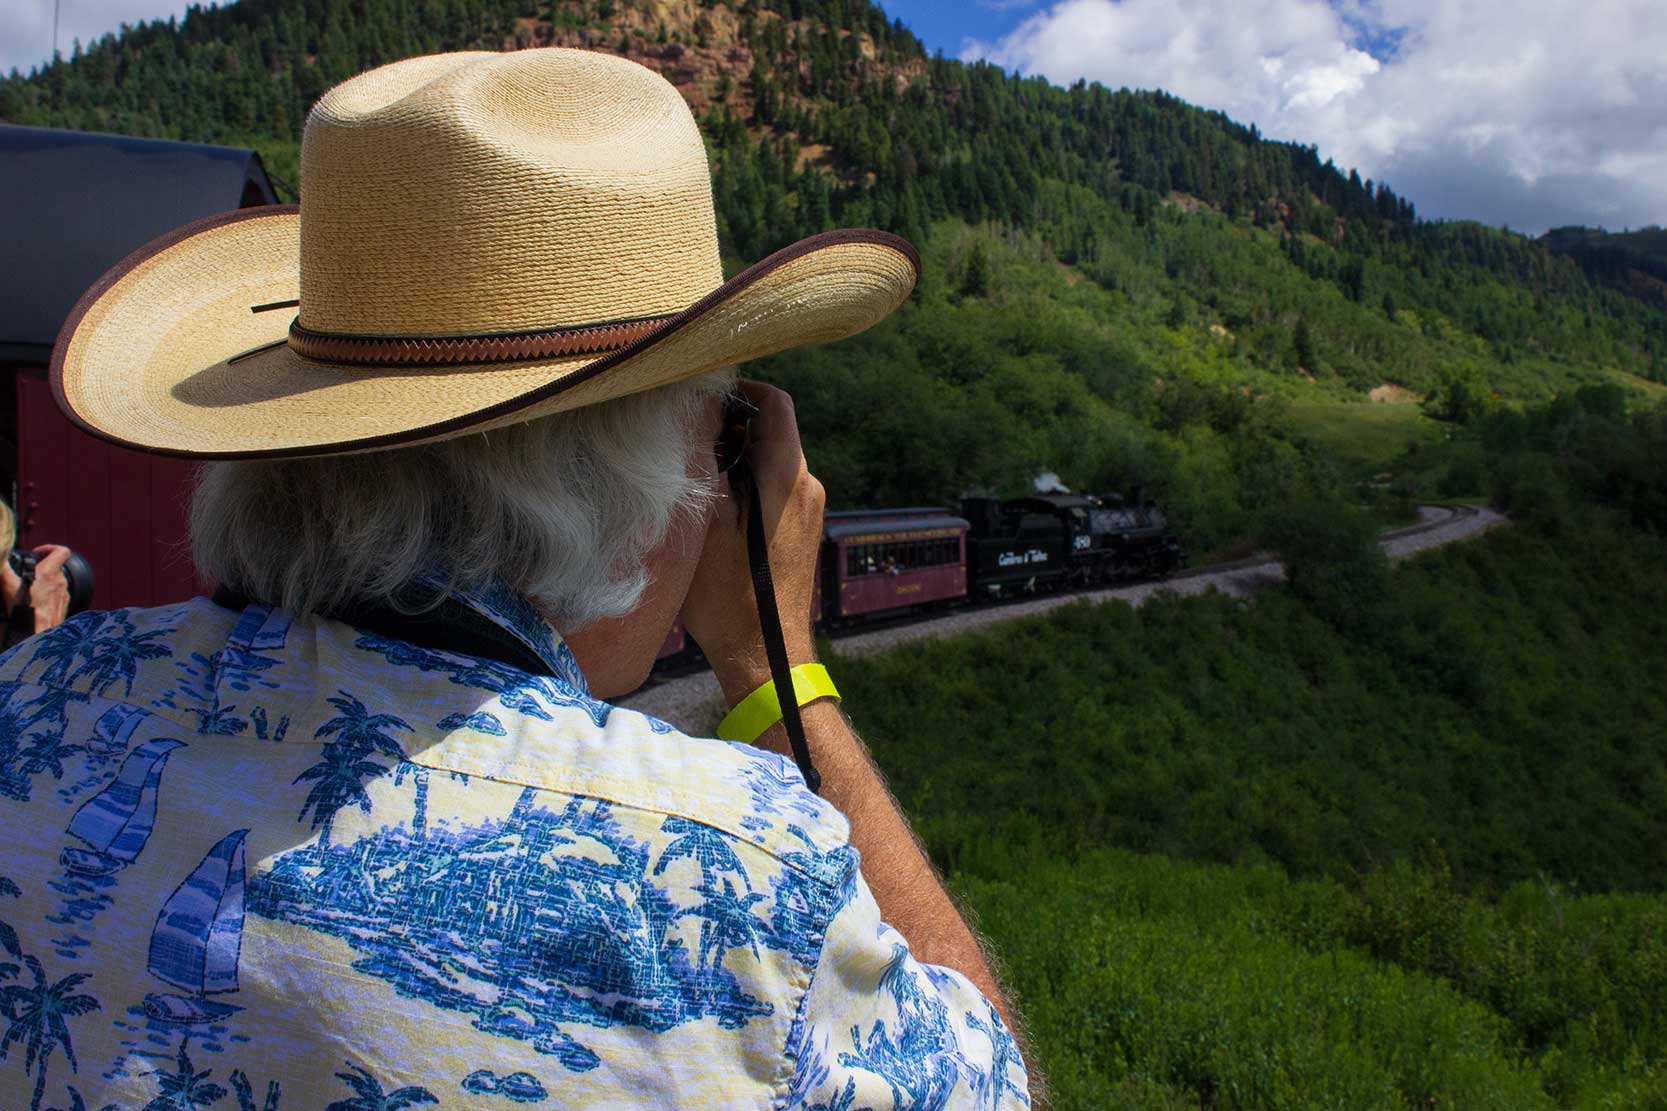 A man takes a photo of a steam locomotive from the gondola car of a train